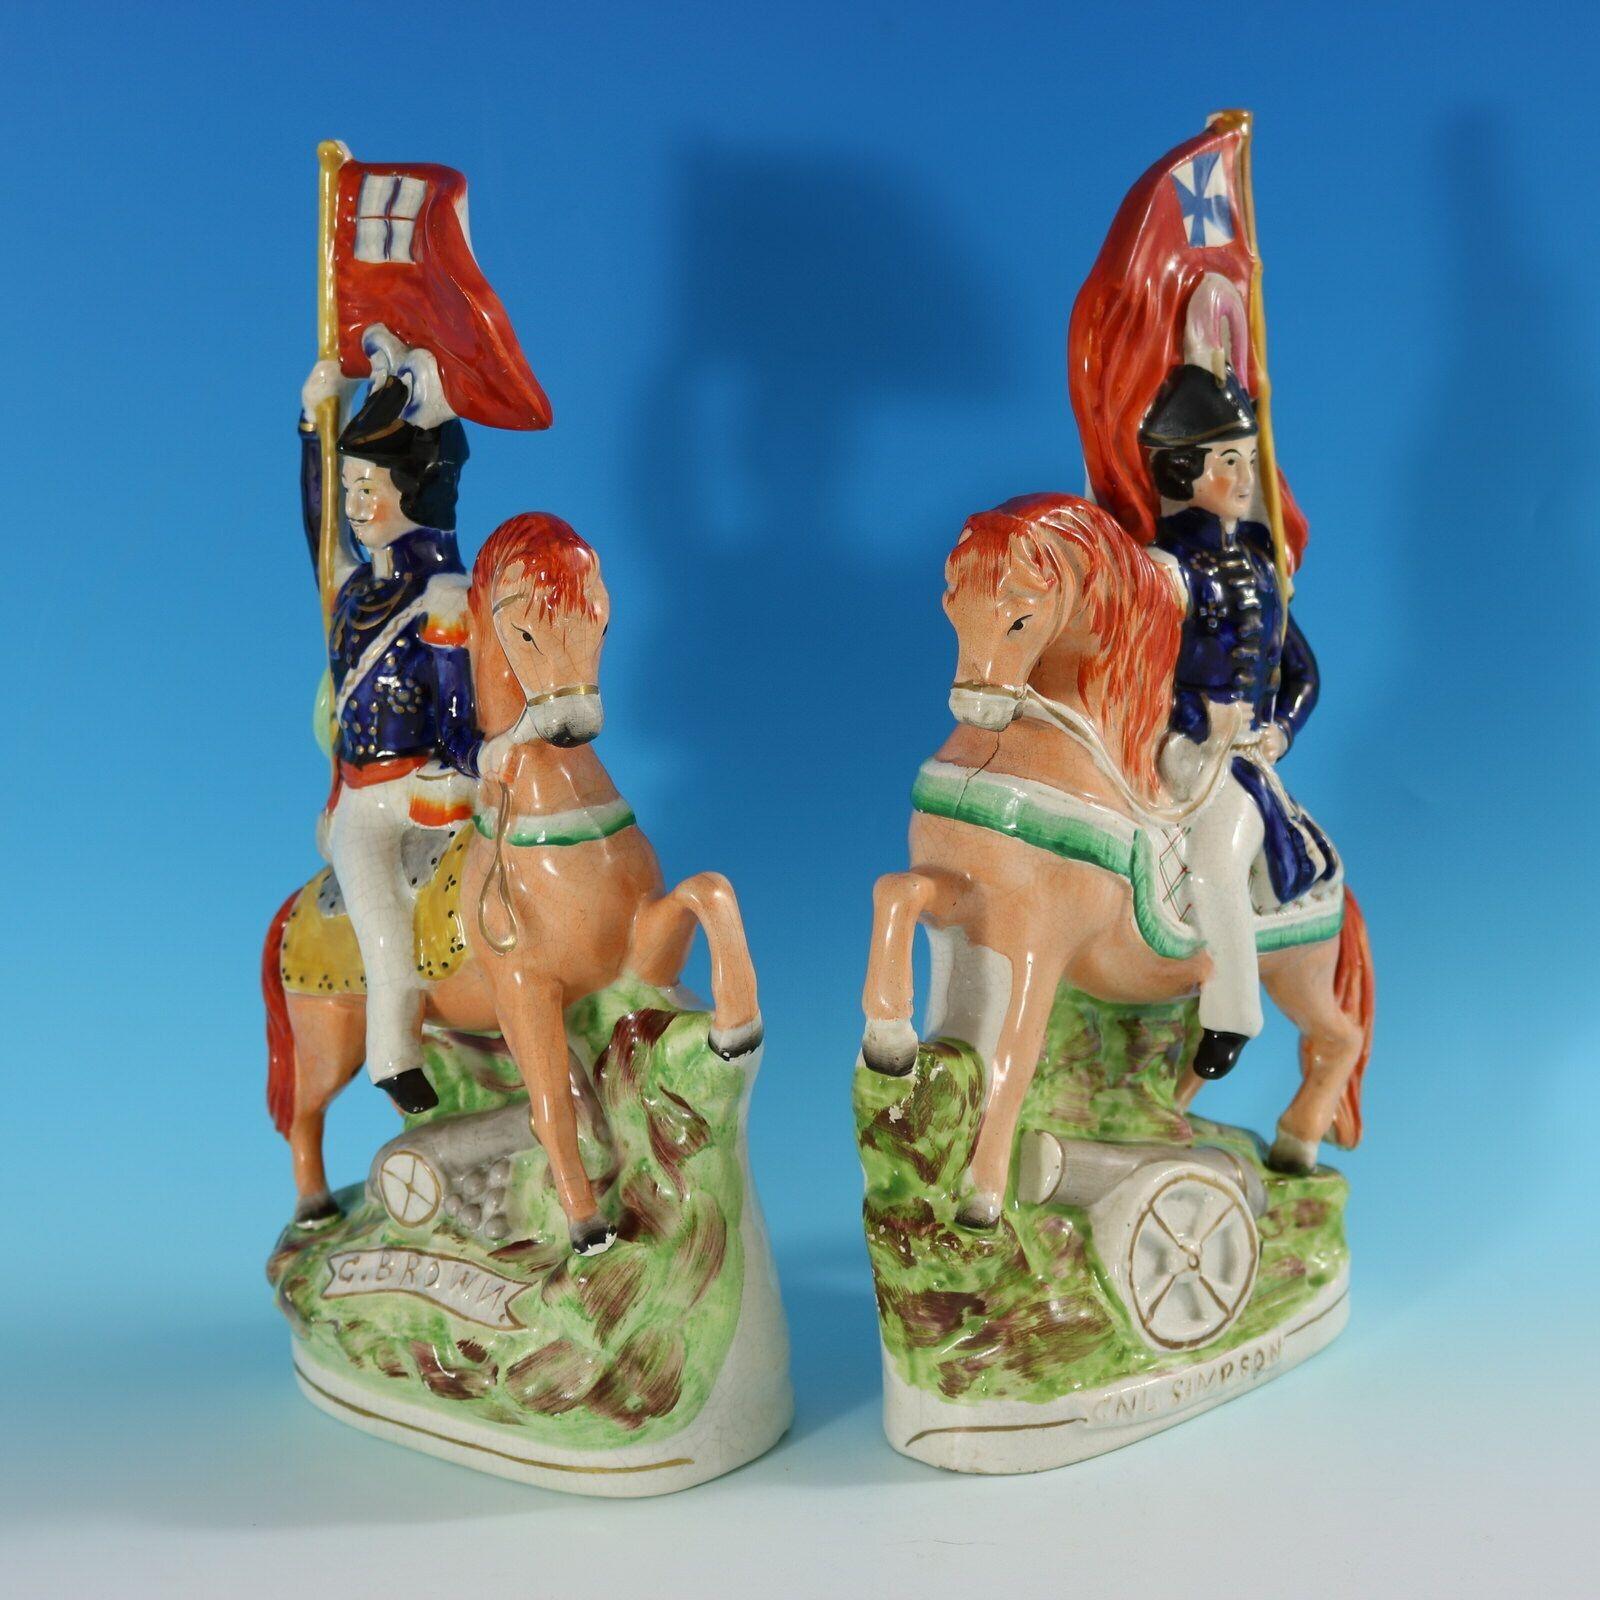 Pair of Staffordshire figures with a military theme which feature two generals each holding a flag, seated on horseback. The pieces are titled, ''G. BROWN' and 'GNL SIMPSON'' to the fronts. Dull gilt titles and embellishment. These represent Sir